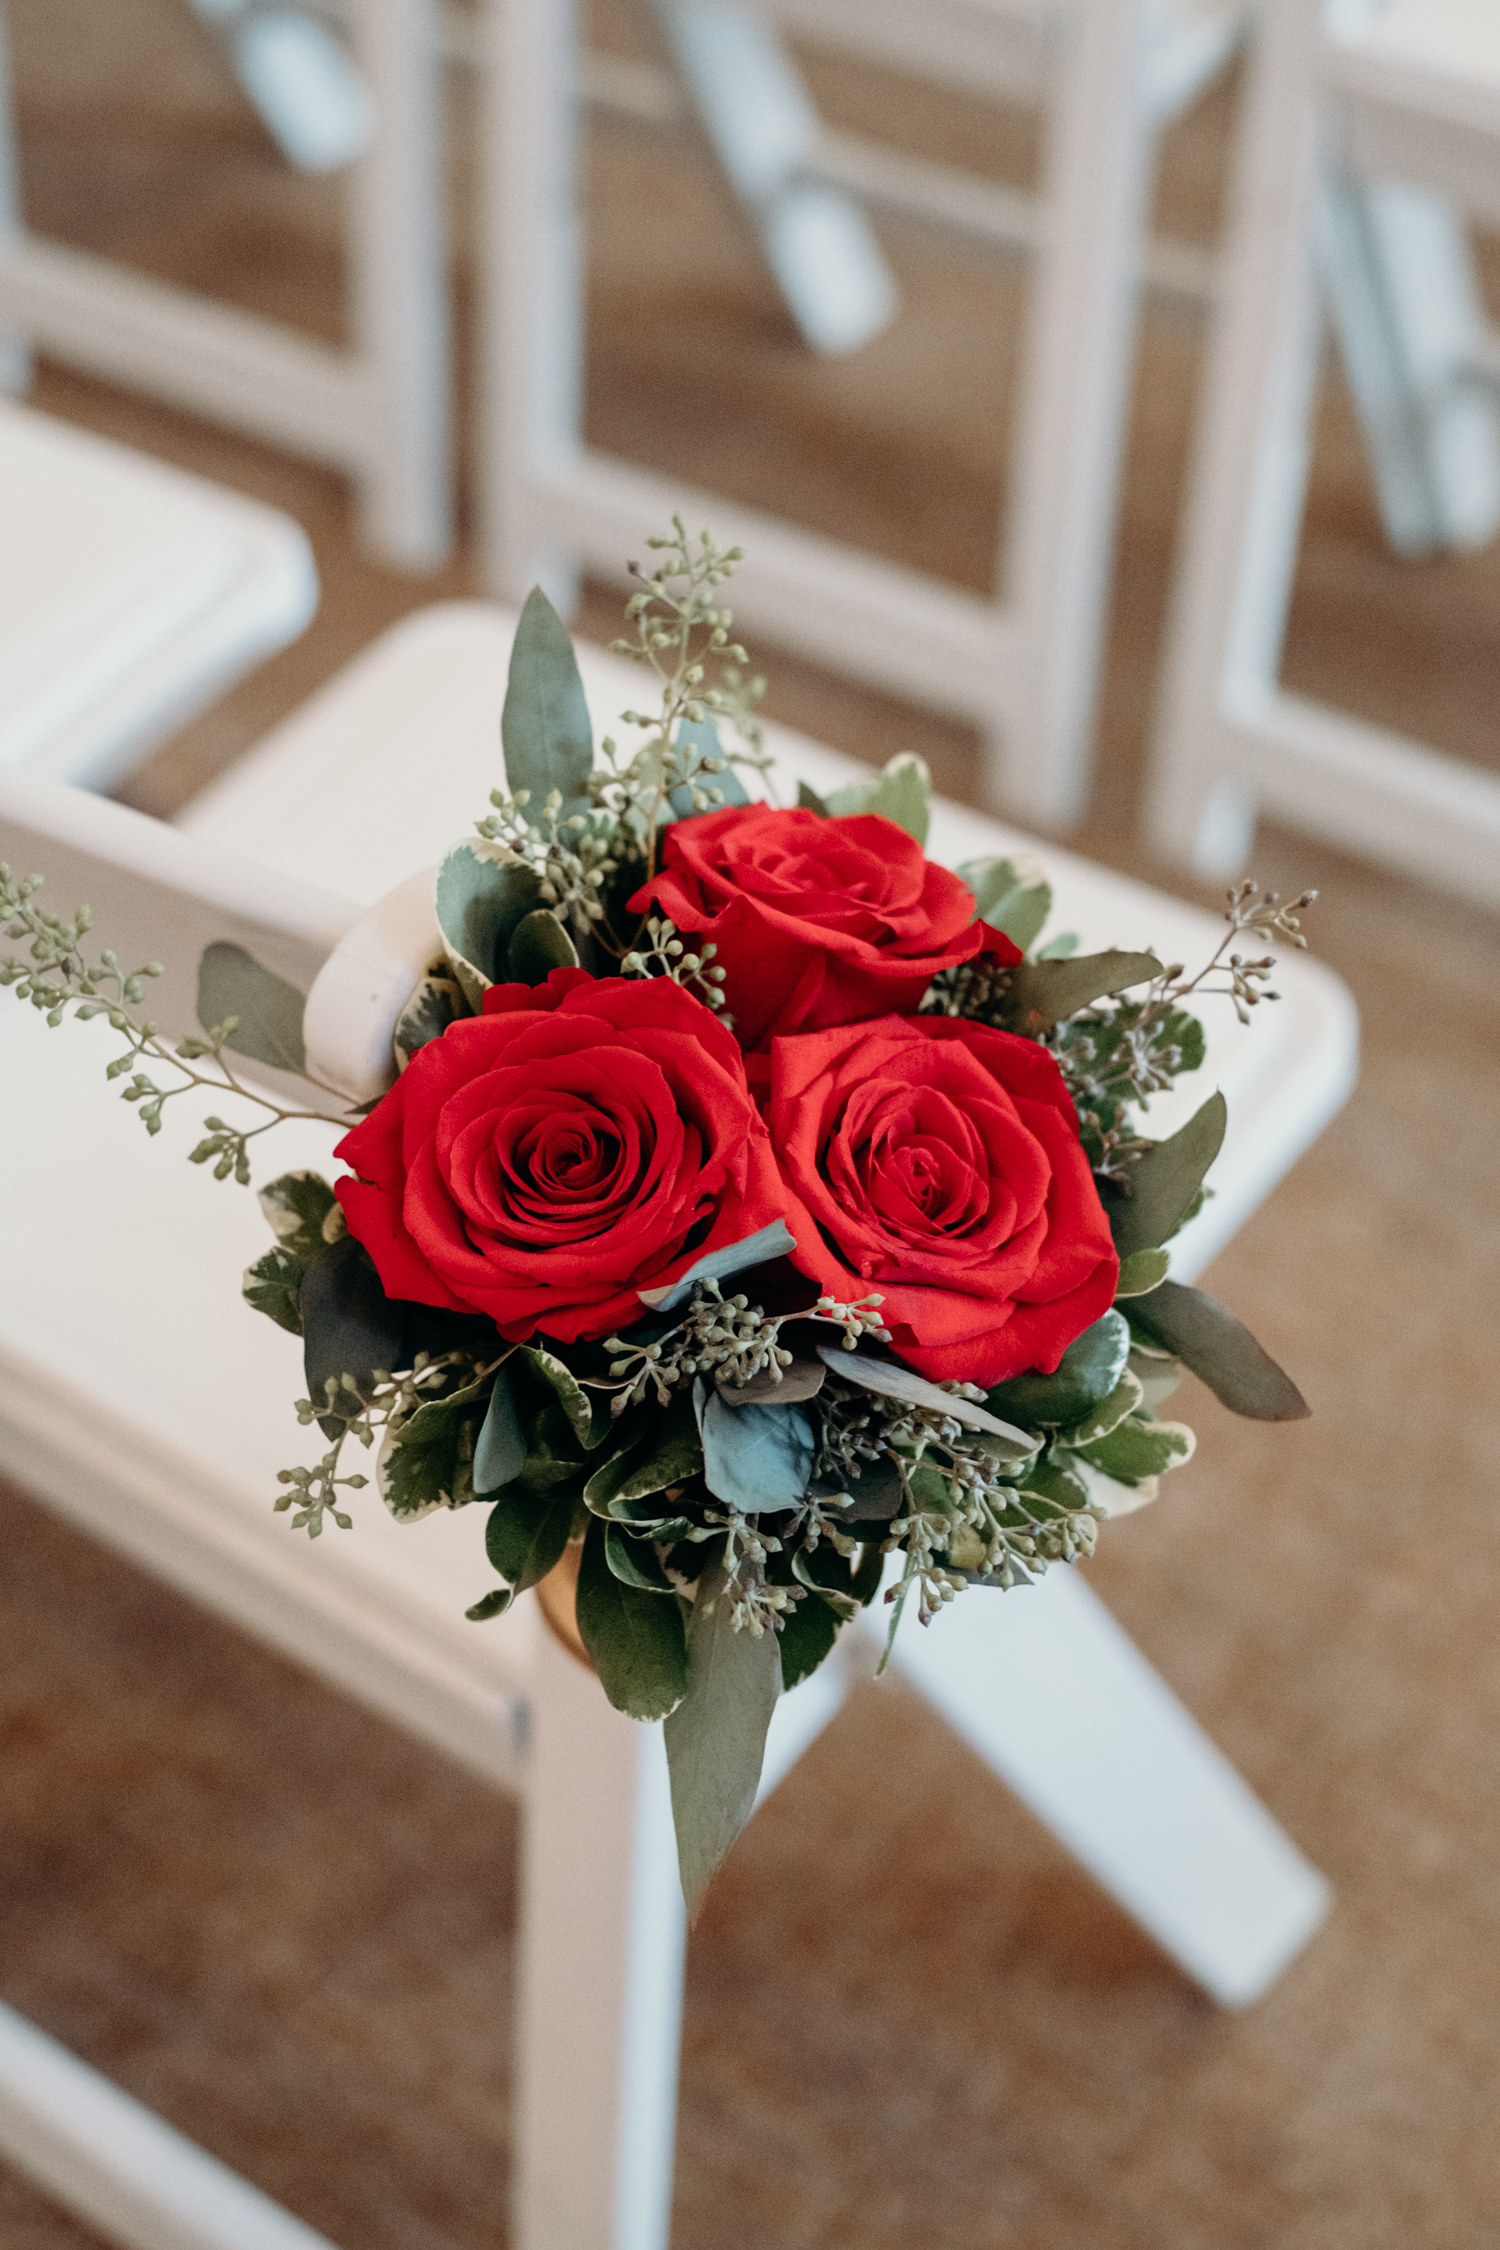 floral arrangement on ceremony chairs at middleburg wedding